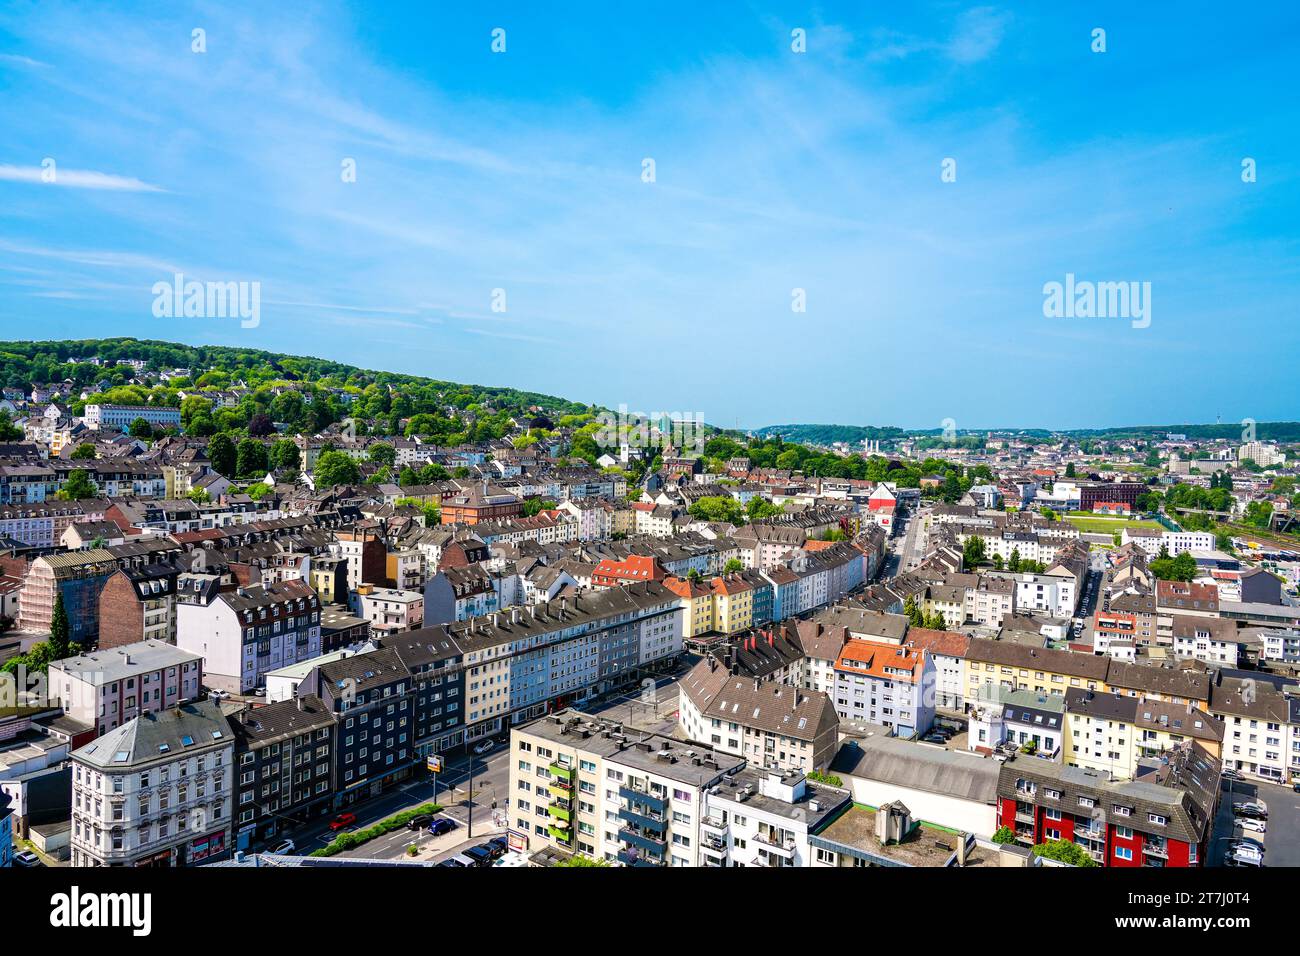 View of the city of Wuppertal. Stock Photo